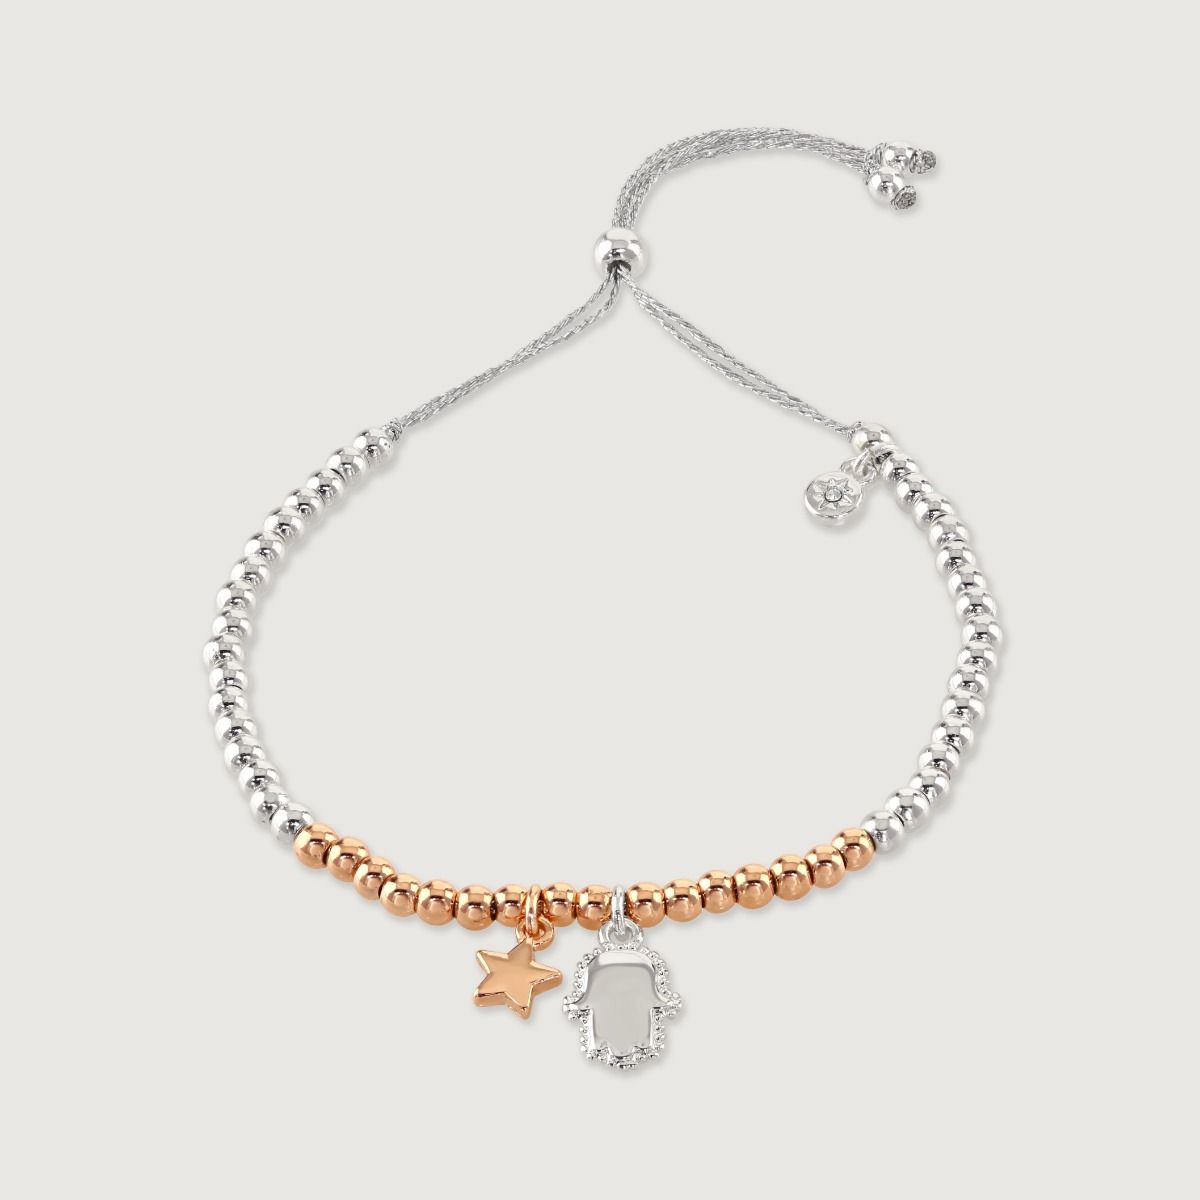 Embrace the essence of friendship with this beaded bracelet adorned with a hamsa hand and star charm. Handcrafted with care, it combines spirituality and celestial beauty. The hamsa hand symbolizes protection, while the star represents guidance. A meaning